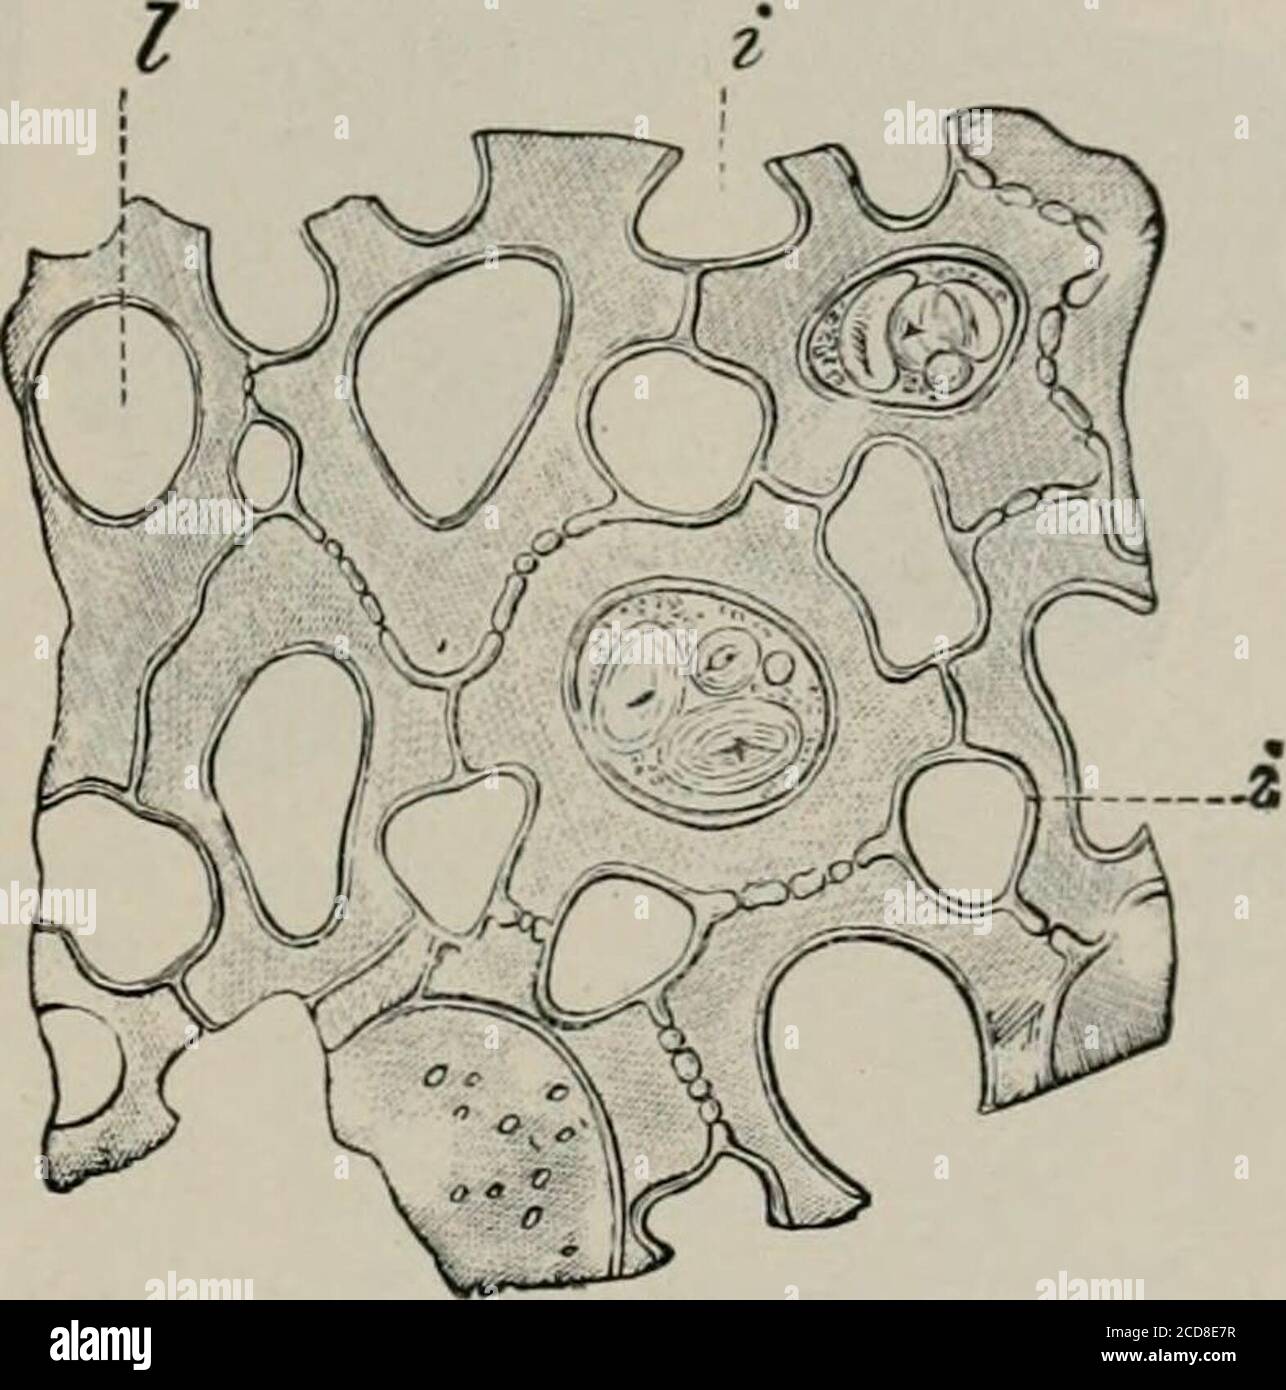 . The microscopy of vegetable foods, with special reference to the detection of adulteration and the diagnosis of mixtures . Fig. 211. Jack Bean. Subepidermal cellsof spermoderm. Xi6o. (Moeller.) Fig. 212. Jack Bean. Cotyledon tissueshowing i intercellular spaces and / sec-tion of cell arm. X160. (Moeller.) layers of column cells (Fig. 211). The starch (Fig. 212) is of muchthe same size and form as that of the common bean. BIBLIOGRAPHY.See General Bibliography, pp. 671-674: Moeller (29). FENUGREEK. Seeds of fenugreek {Trigonella Foemim-Graecum L.), remarkable alikefor their curious shape, arom Stock Photo